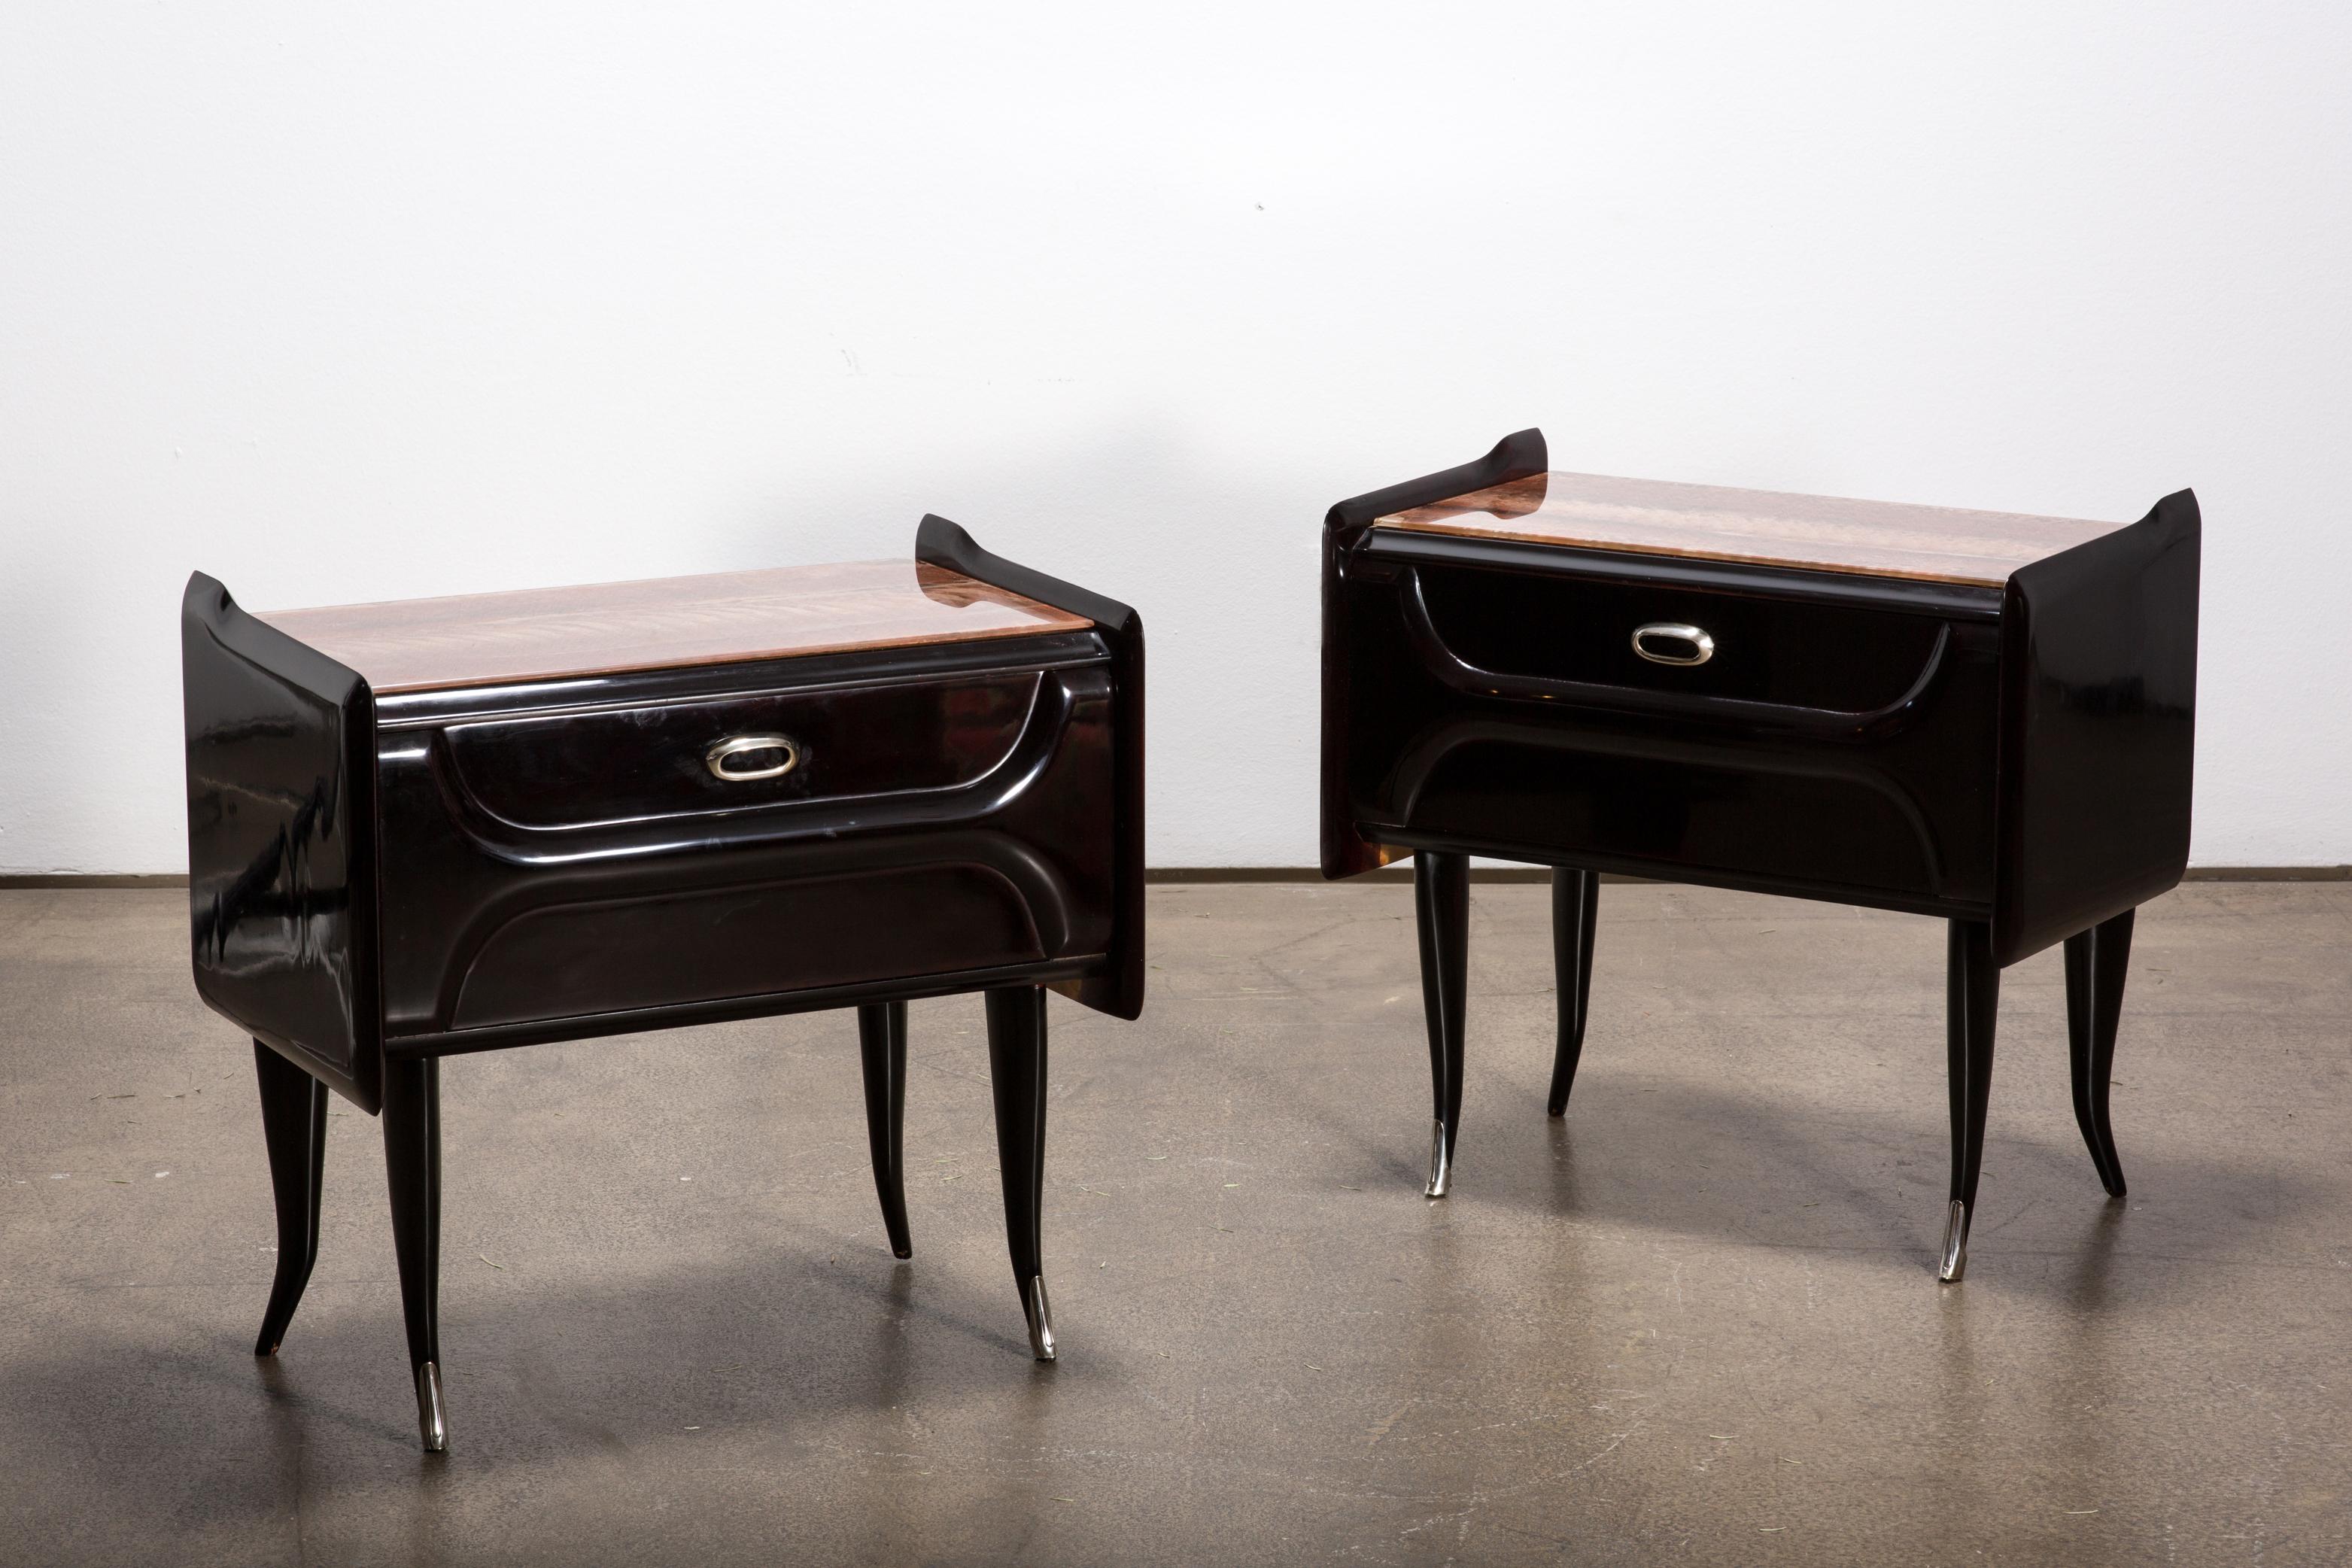 This two elegant midcentury nightstands were manufacured in Italy. 

The imposing structure combined with the exterior and the mahogany interior makes this a very beautiful piece of art. The skillfully crafted nightstands are made of an ebonized